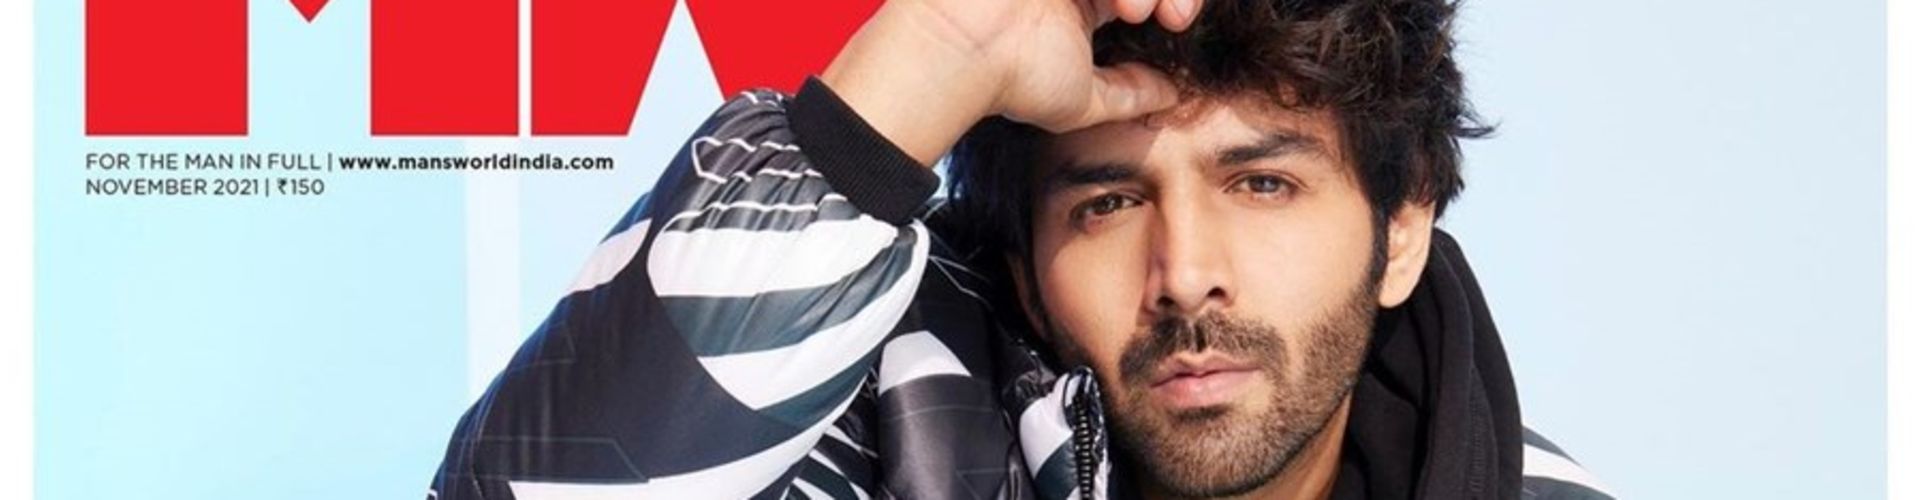 Decoding God Given Gift, Kartik Aaryan On MW’s Cover Page